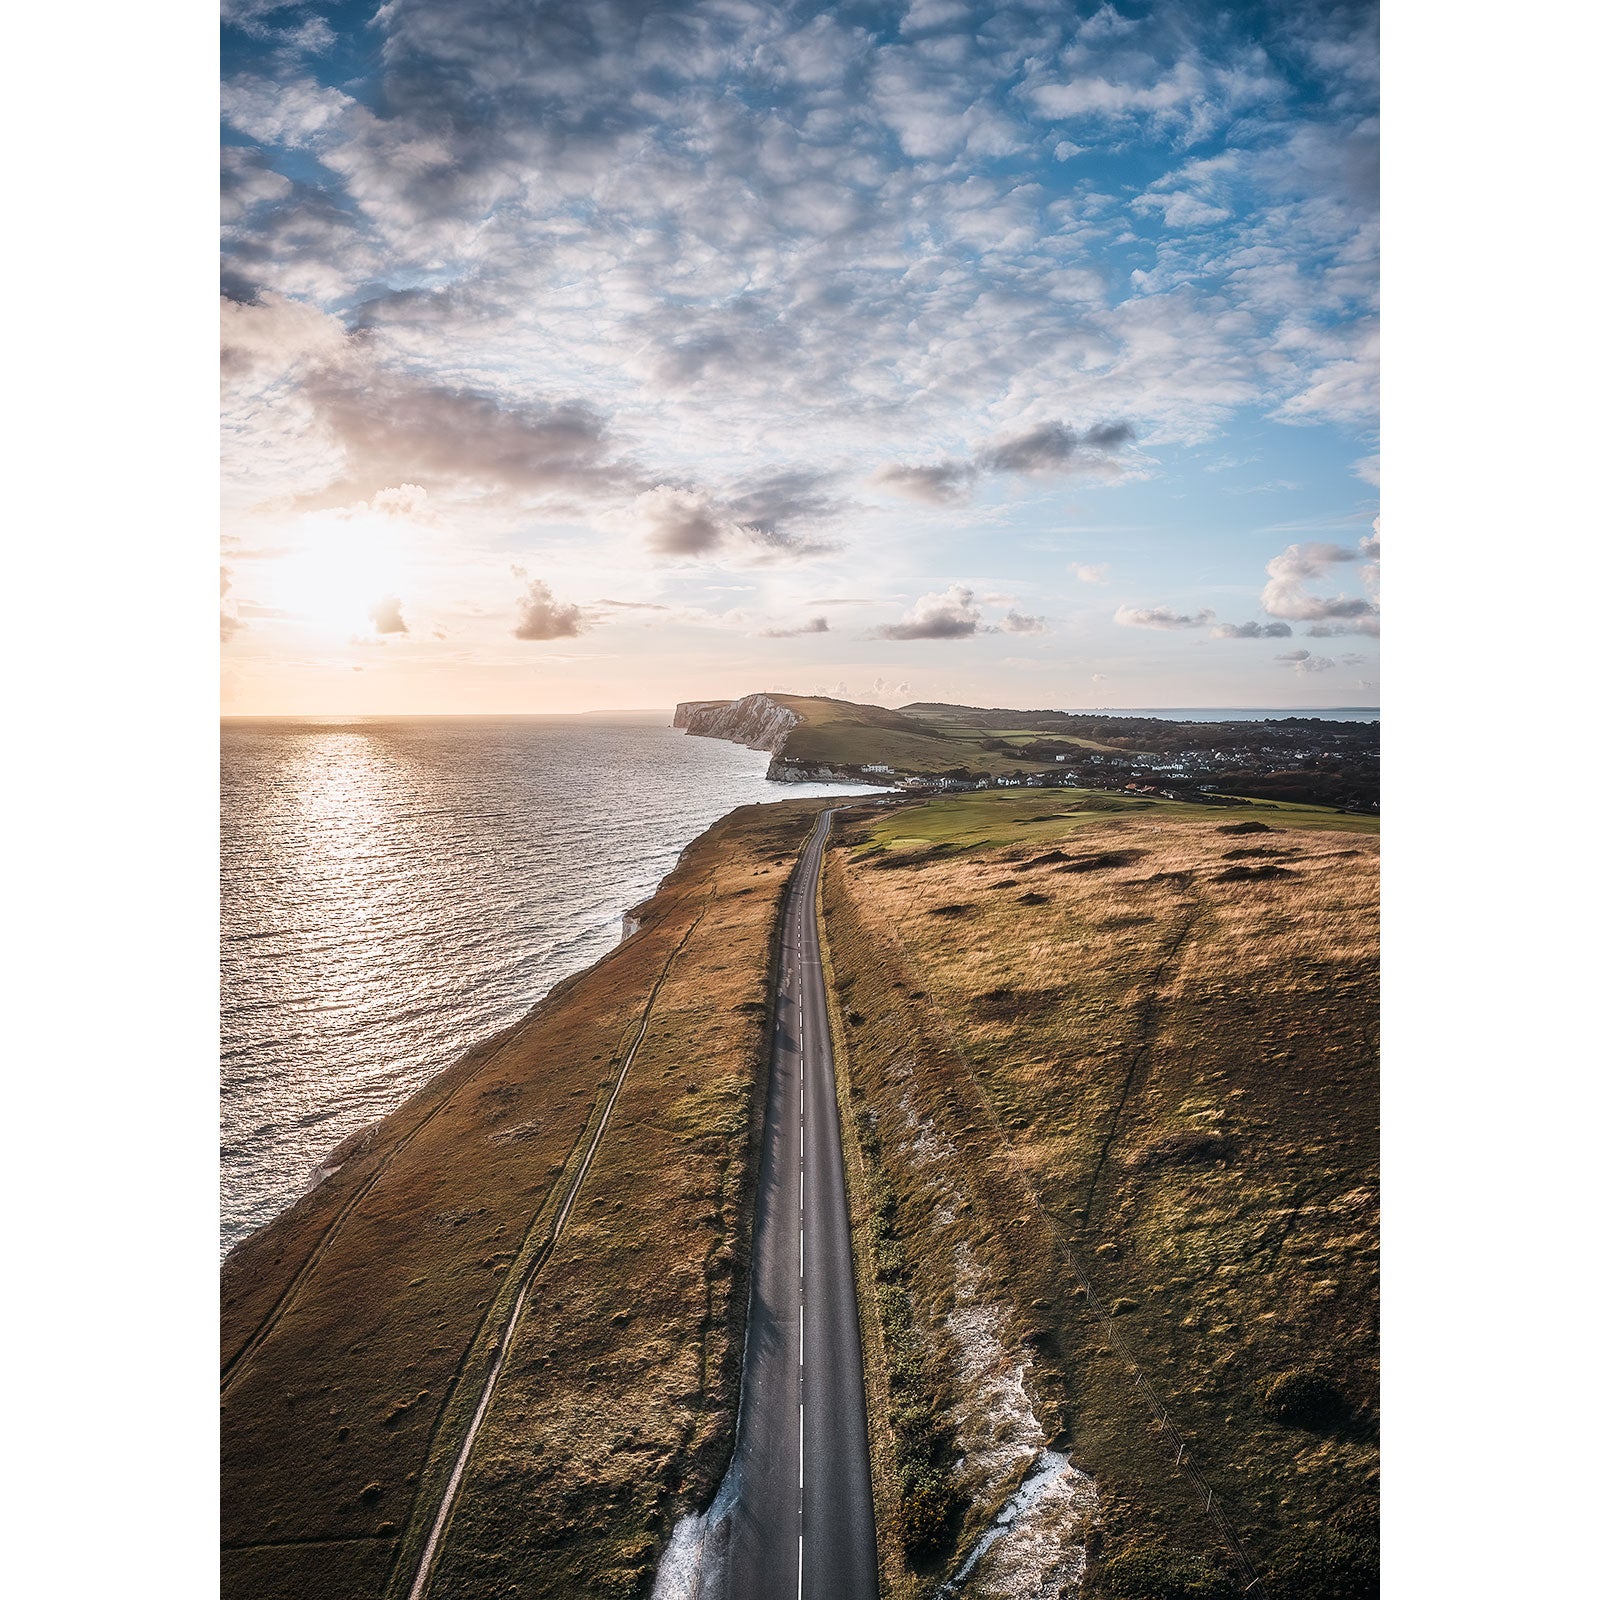 Coastal road leading towards cliffs under a cloudy sky at sunset on the Isle of Wight, featuring The Military Road by Available Light Photography.